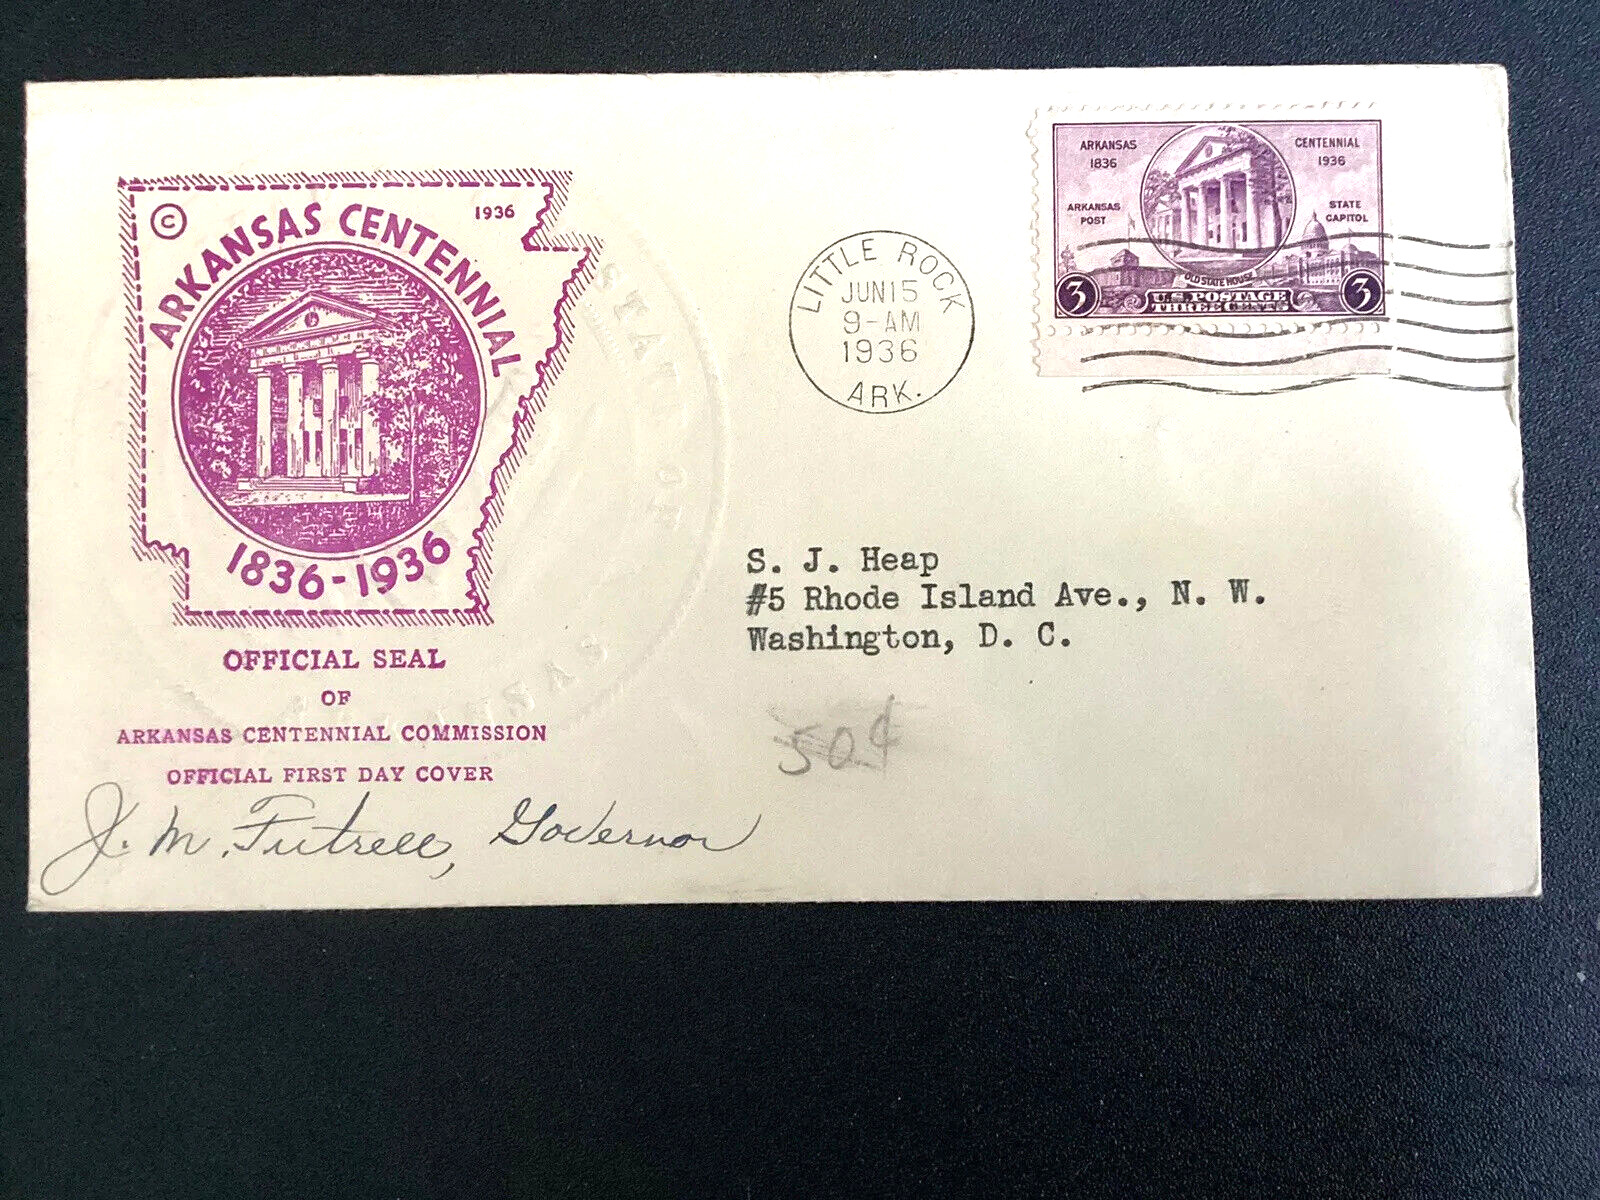 Autograph Gov.of Arkansas J. M. Futrell 1936 on envelope with EMBOSSED SEAL